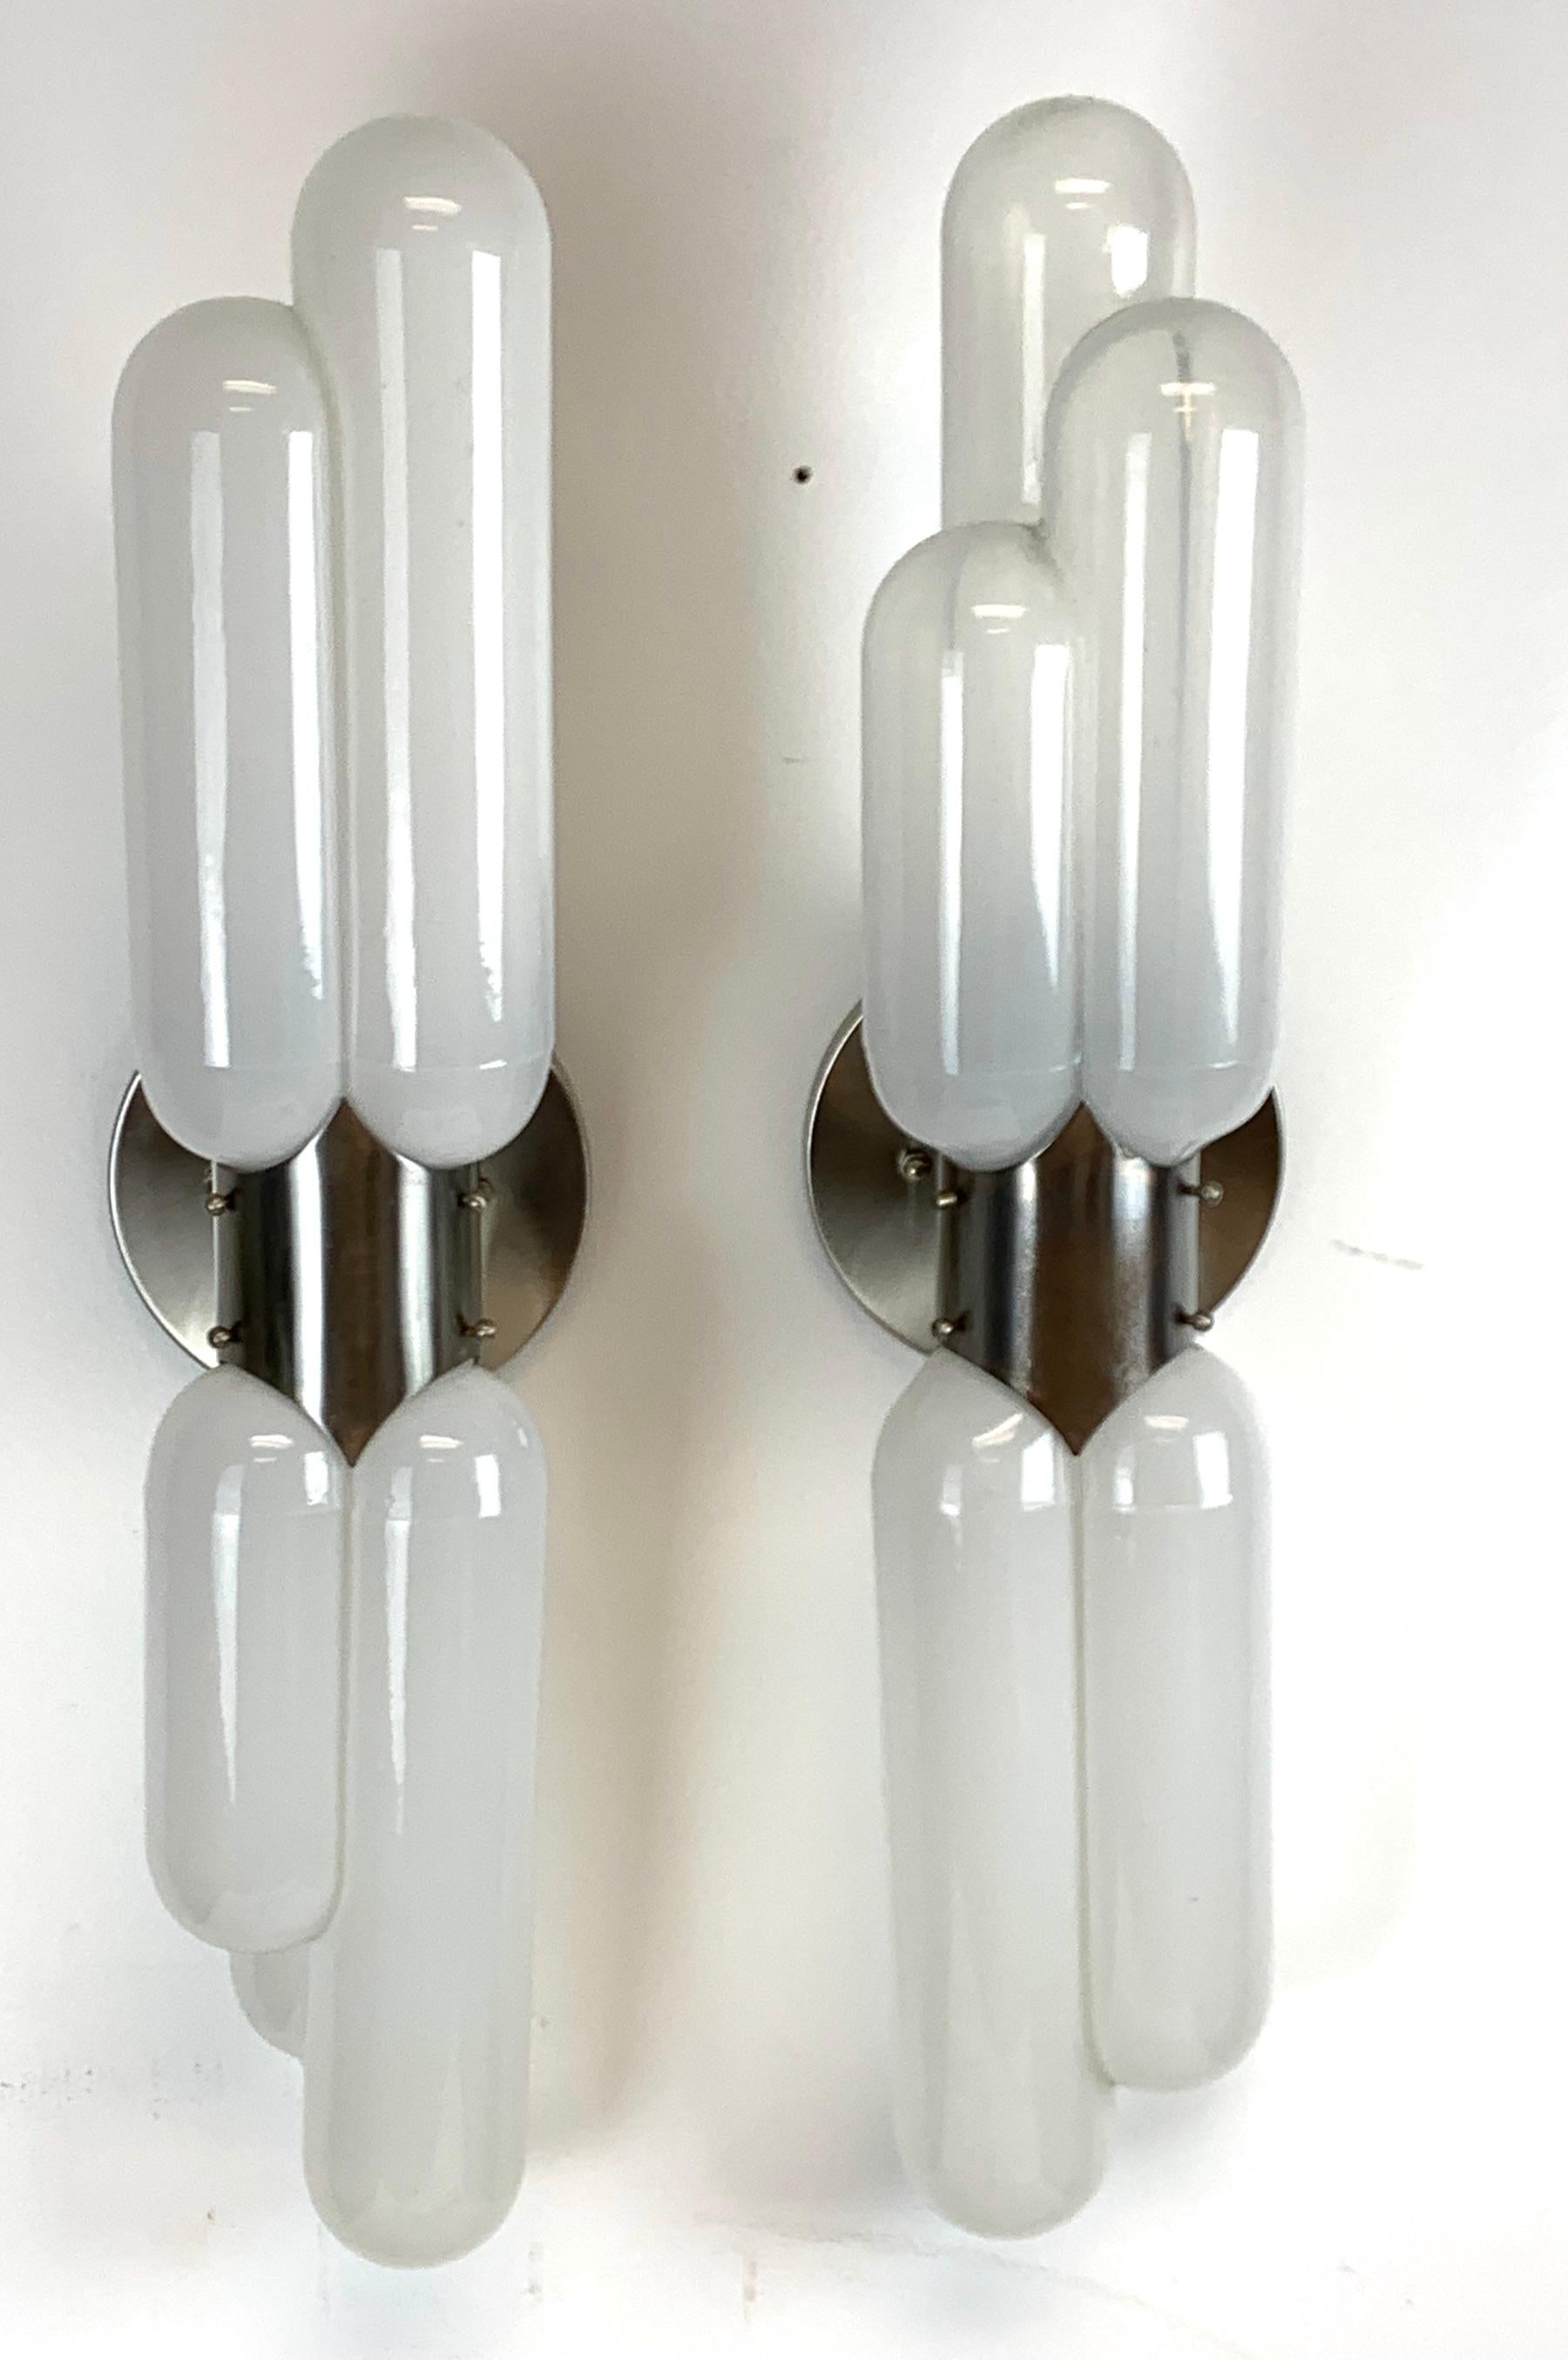 Carlo Nason for Mazzega Wall Sconce,  3 Single Sconces 
Brass and chrome tubular sconces from Italy by Carlo Nason for Mazzega. Fully restored and ready to use. Priced individually, a pair retails at $3,790.00 as shown in lead image.